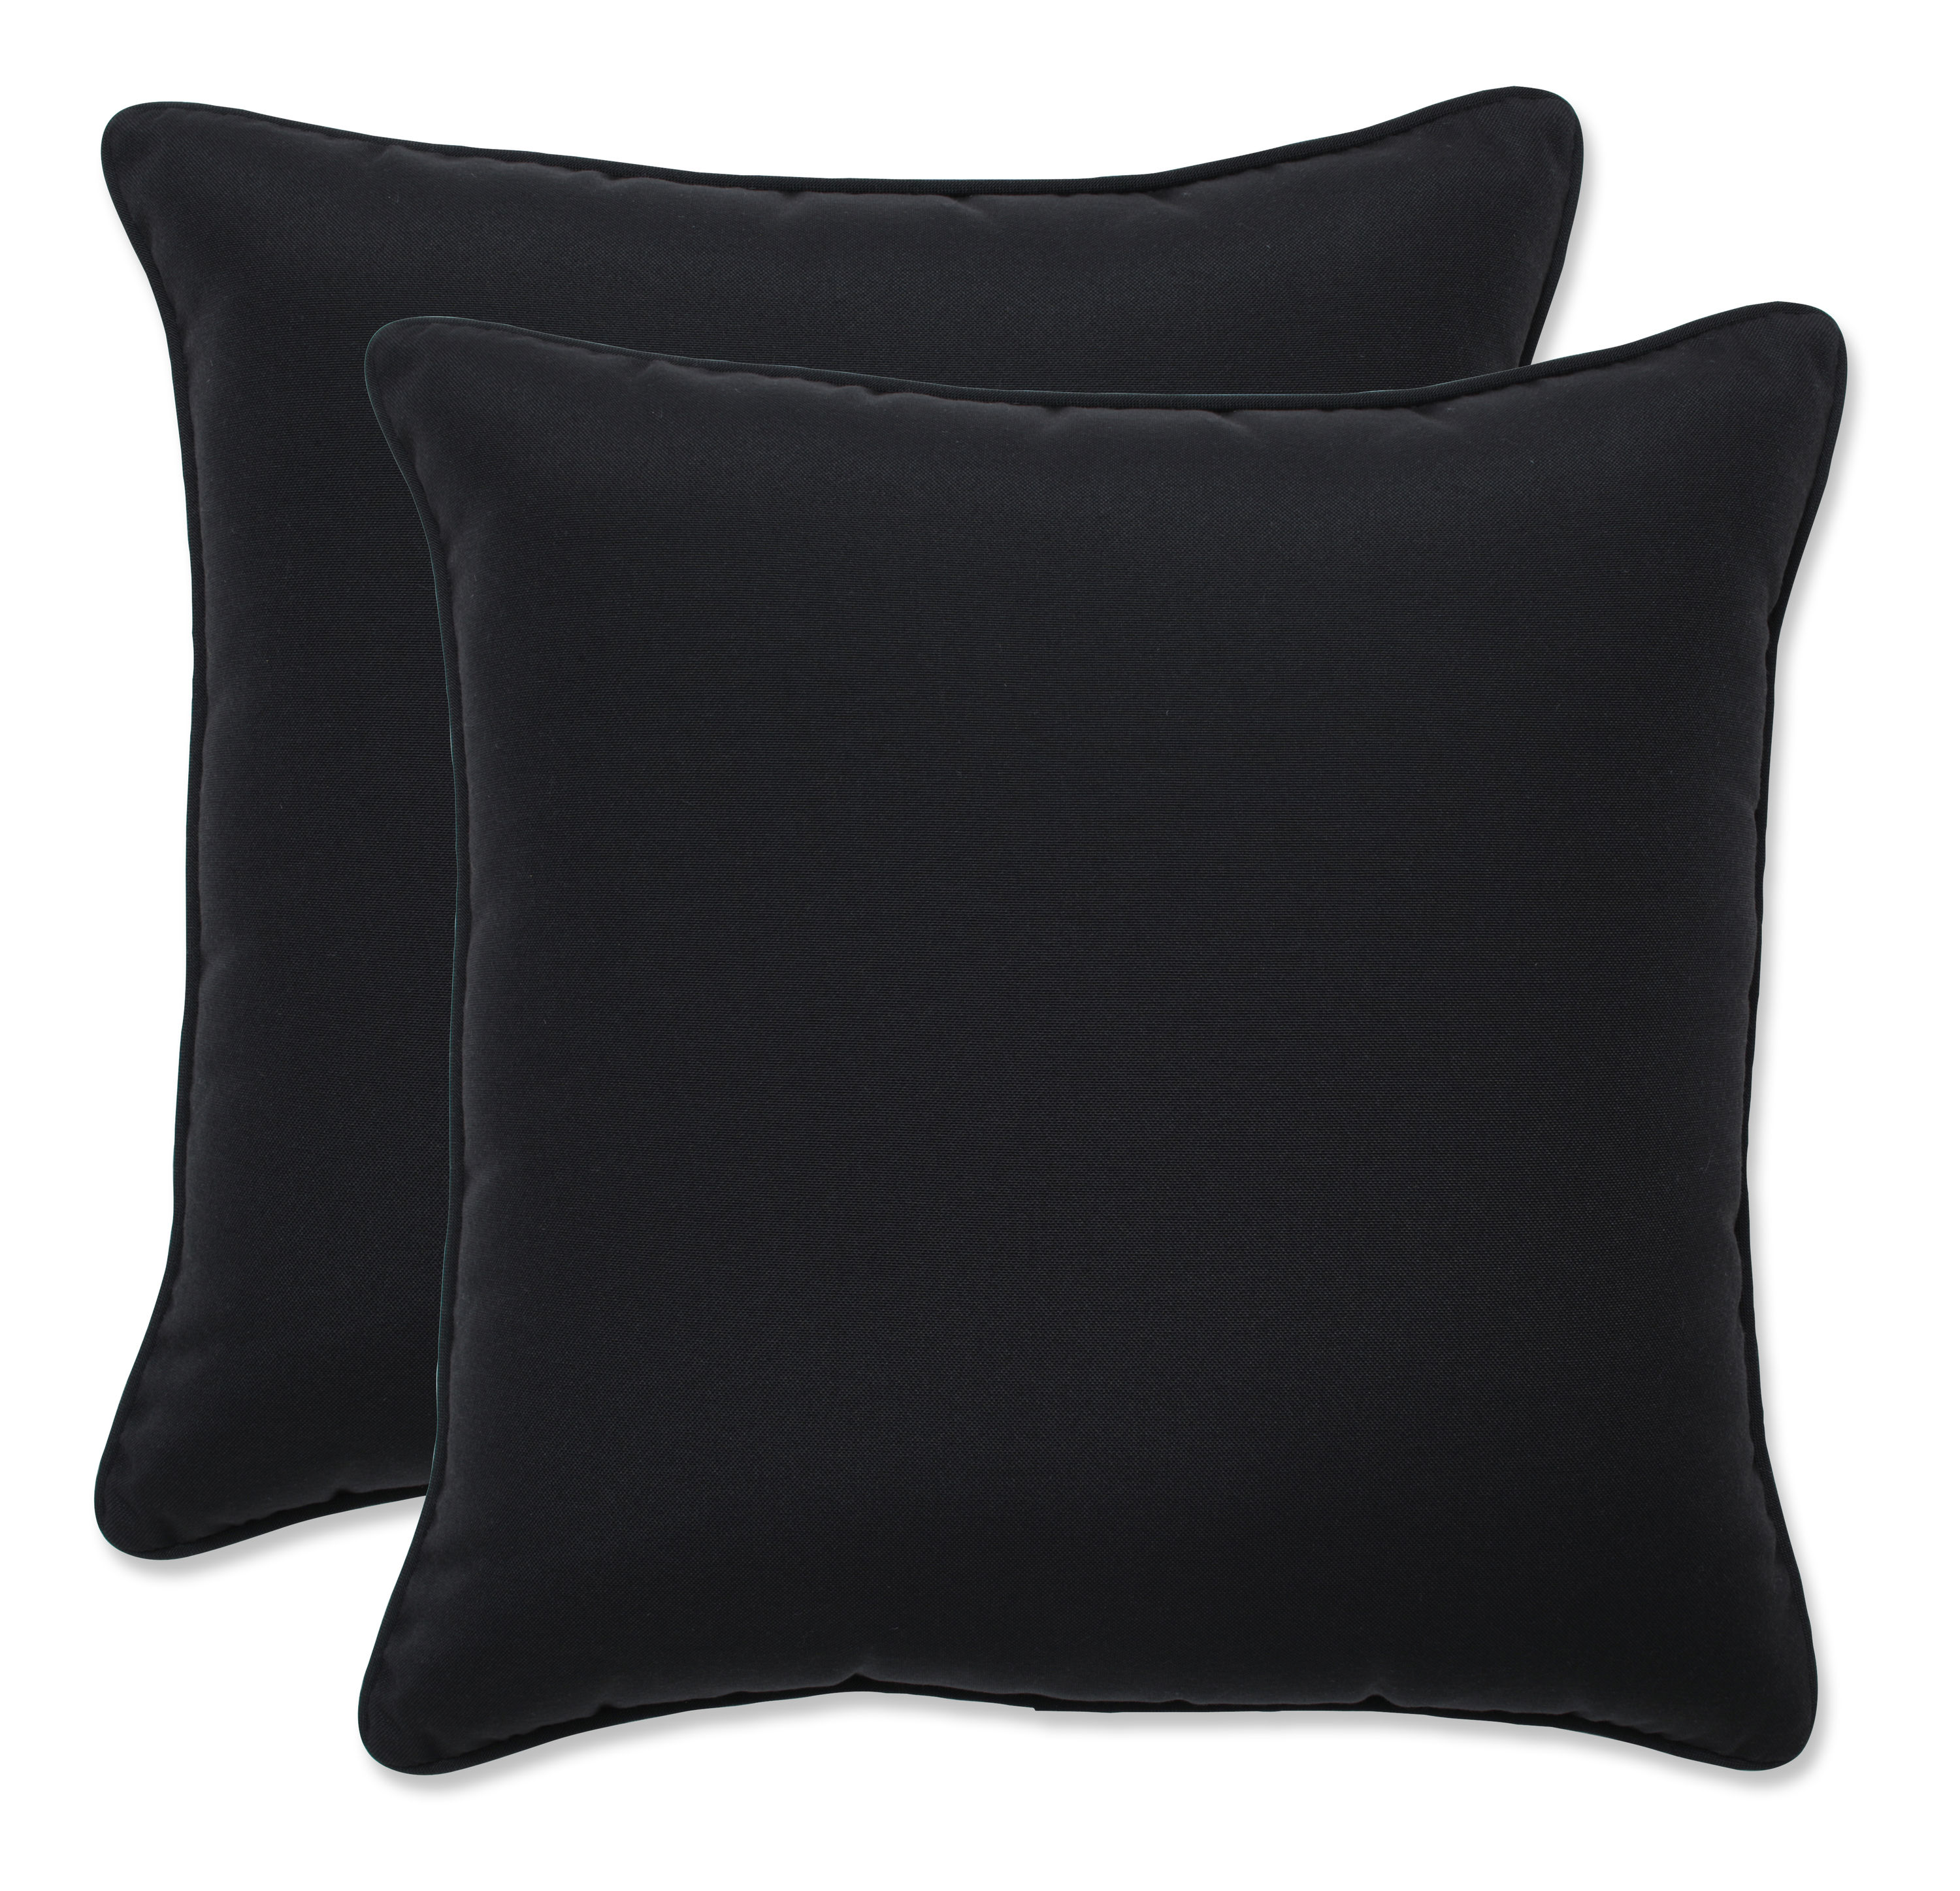 2 Pack Black Pillow Perfect Outdoor/Indoor Dawson Pewter Throw Pillows 16.5 x 16.5 